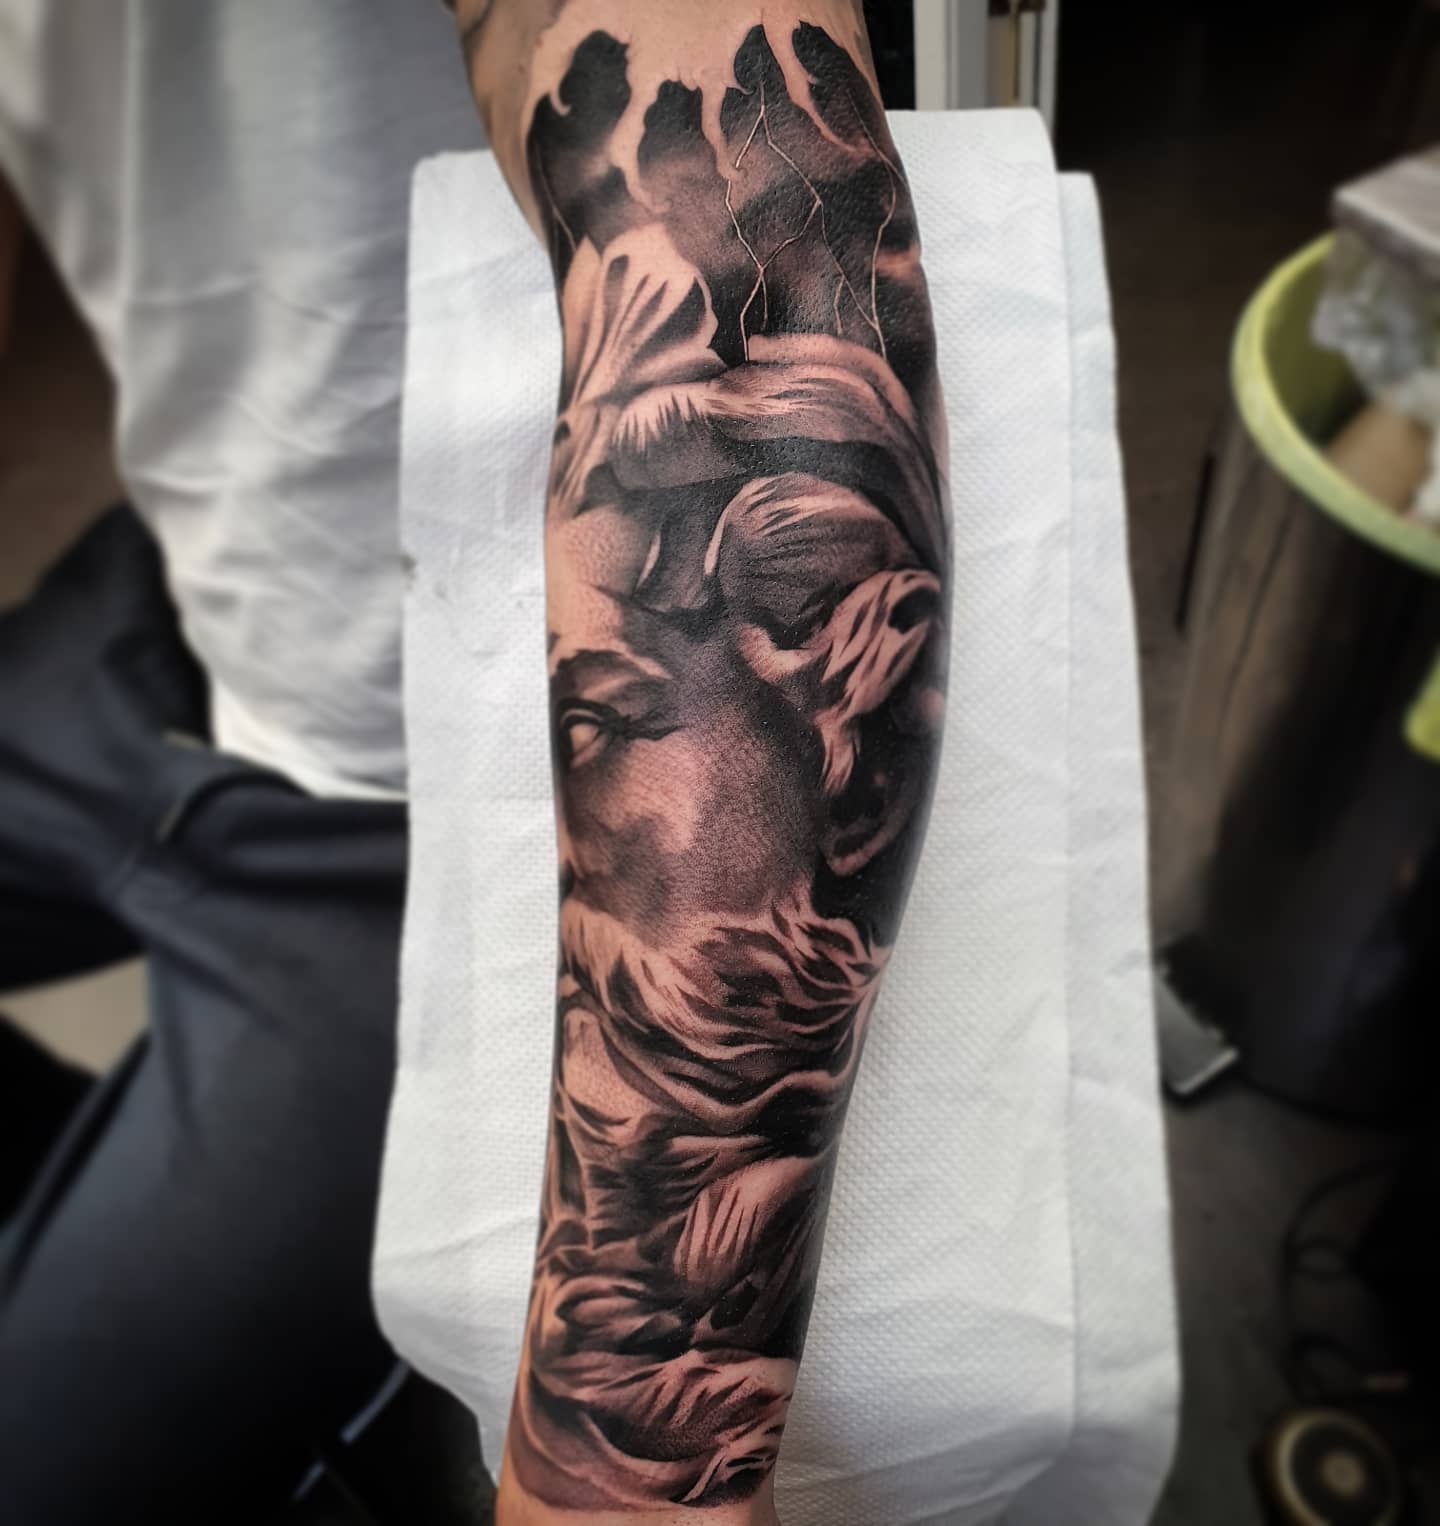 My brand new lower arm tattoo dedicated to Leper, a reminder to withstand  and spread benevolence even in the darkest of times : r/darkestdungeon